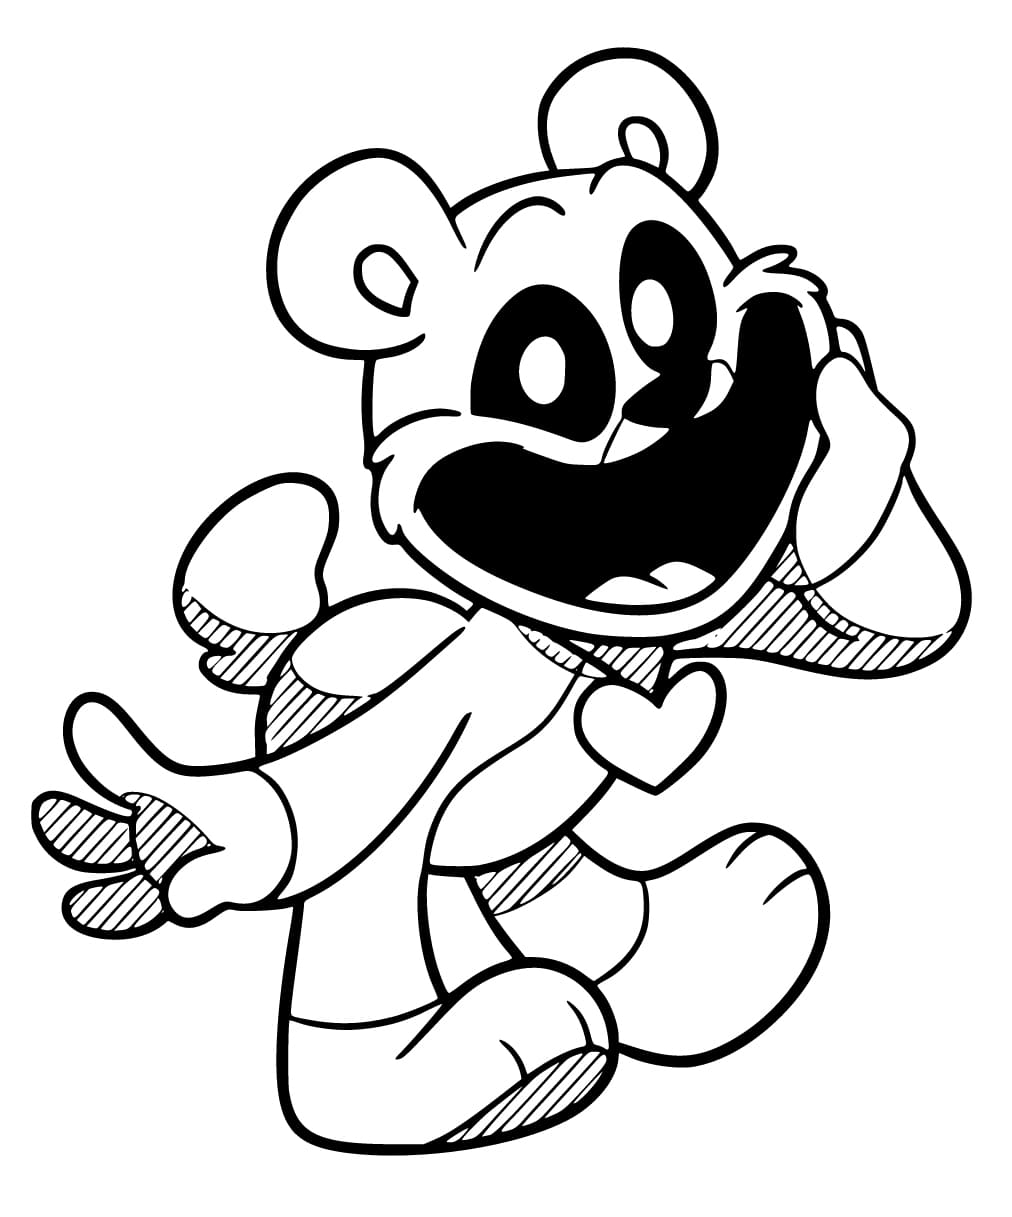 Bobby Bearhug Smiling Critters Coloring Page - Download, Print Or Color